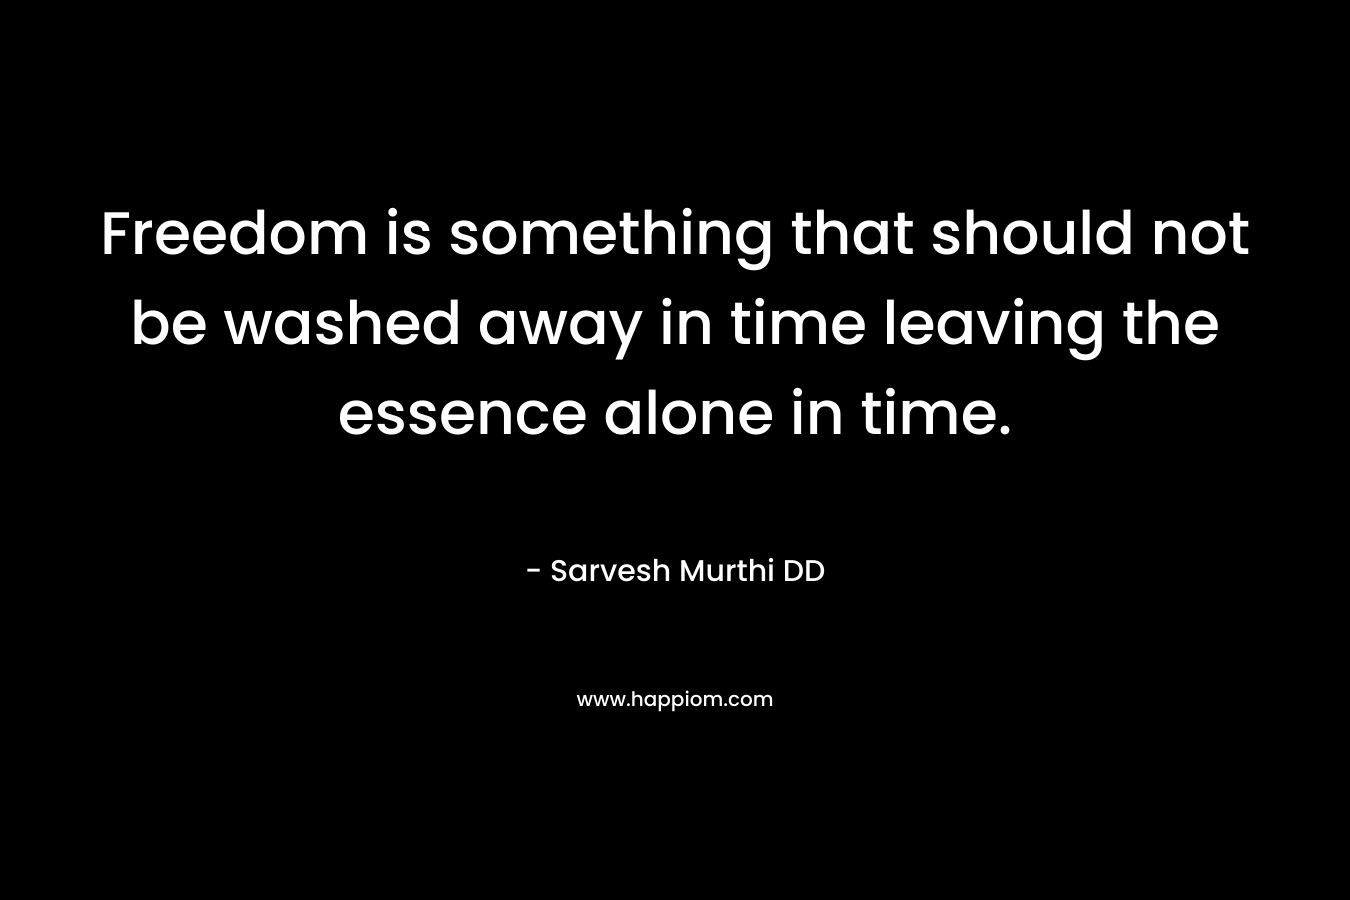 Freedom is something that should not be washed away in time leaving the essence alone in time.